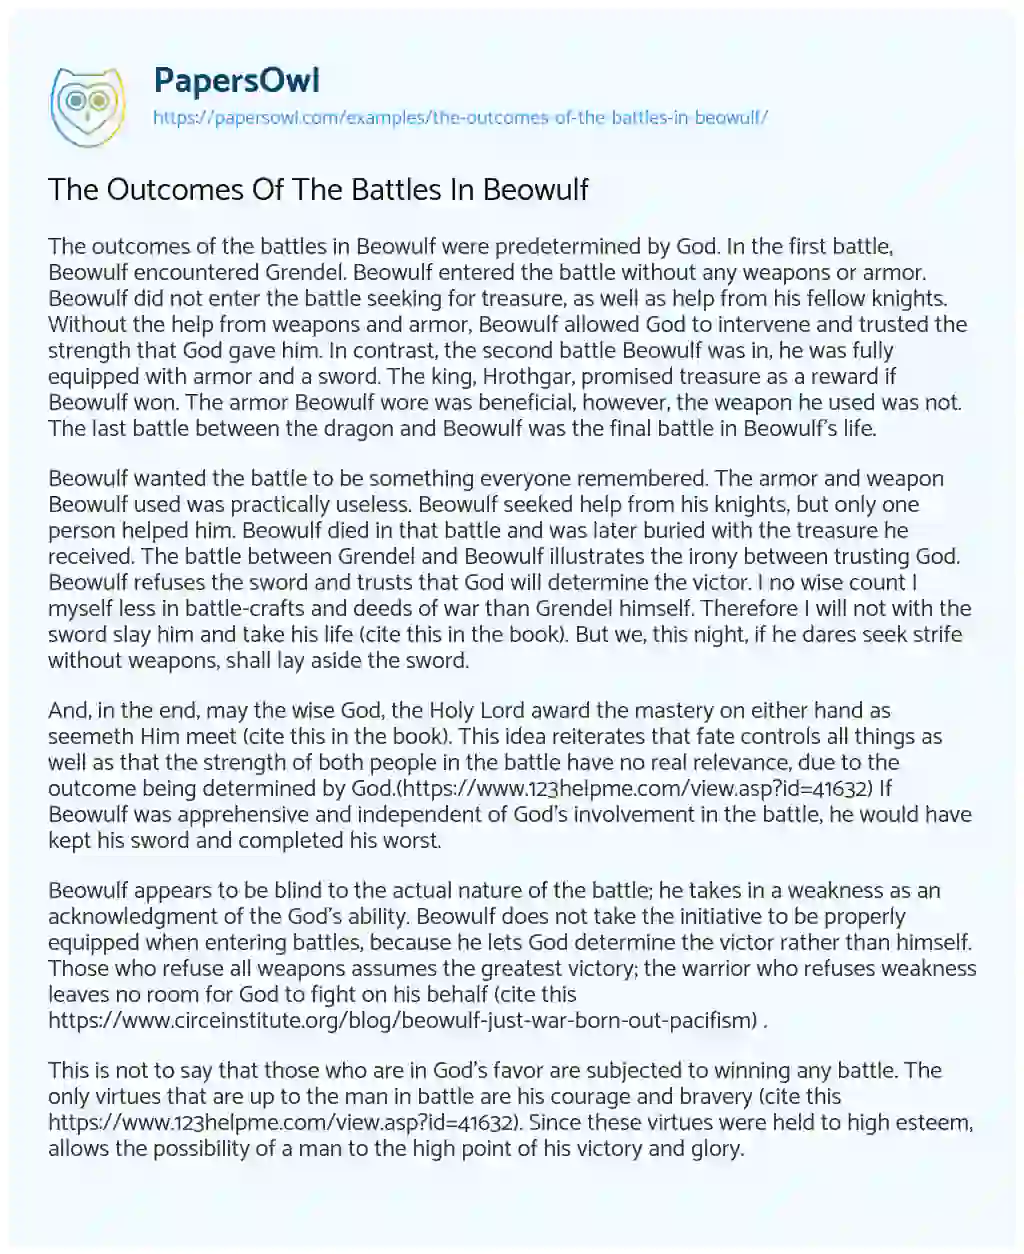 The Outcomes of the Battles in Beowulf essay